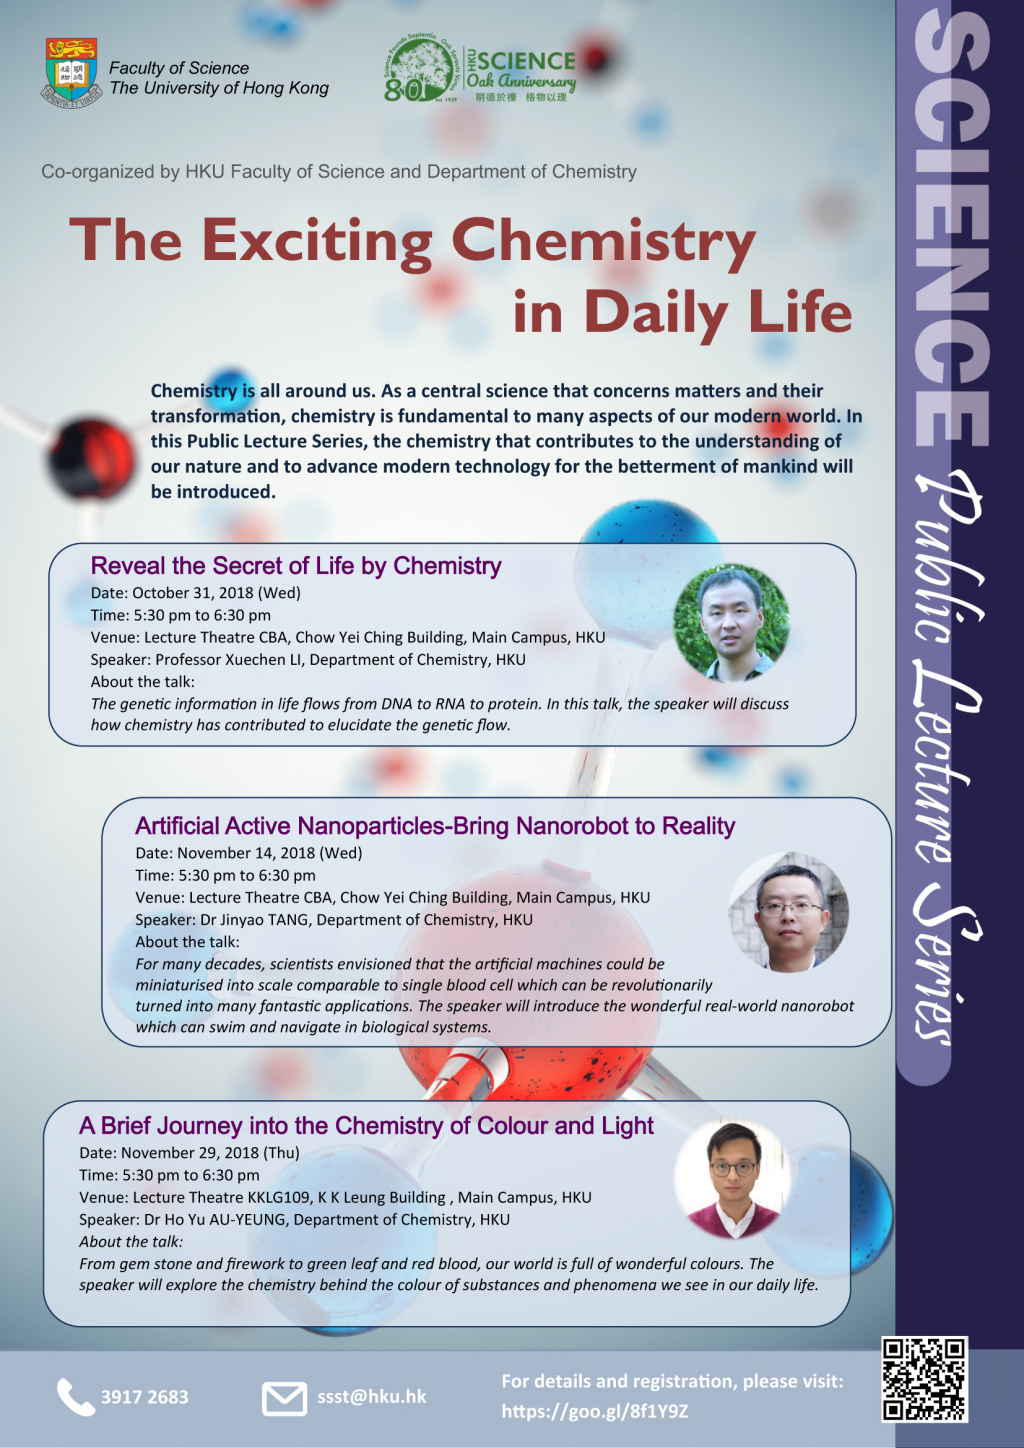 Faculty of Science Public Lecture: Reveal the Secret of Life by Chemistry